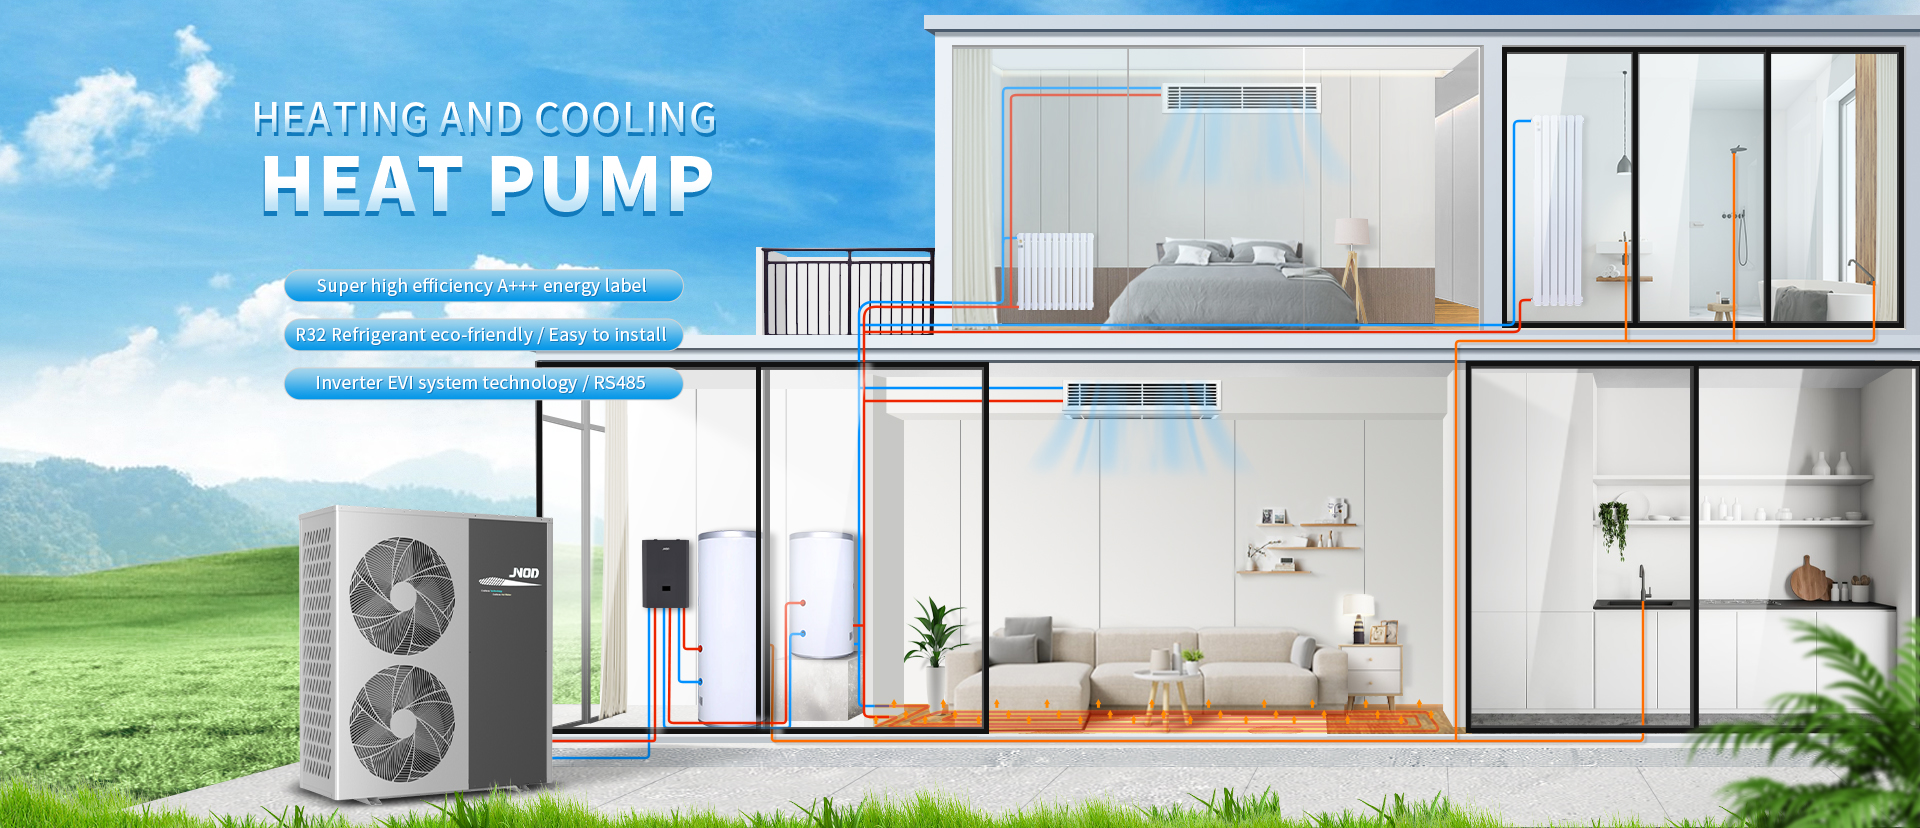 Heating And Cooling Heat Pump market price